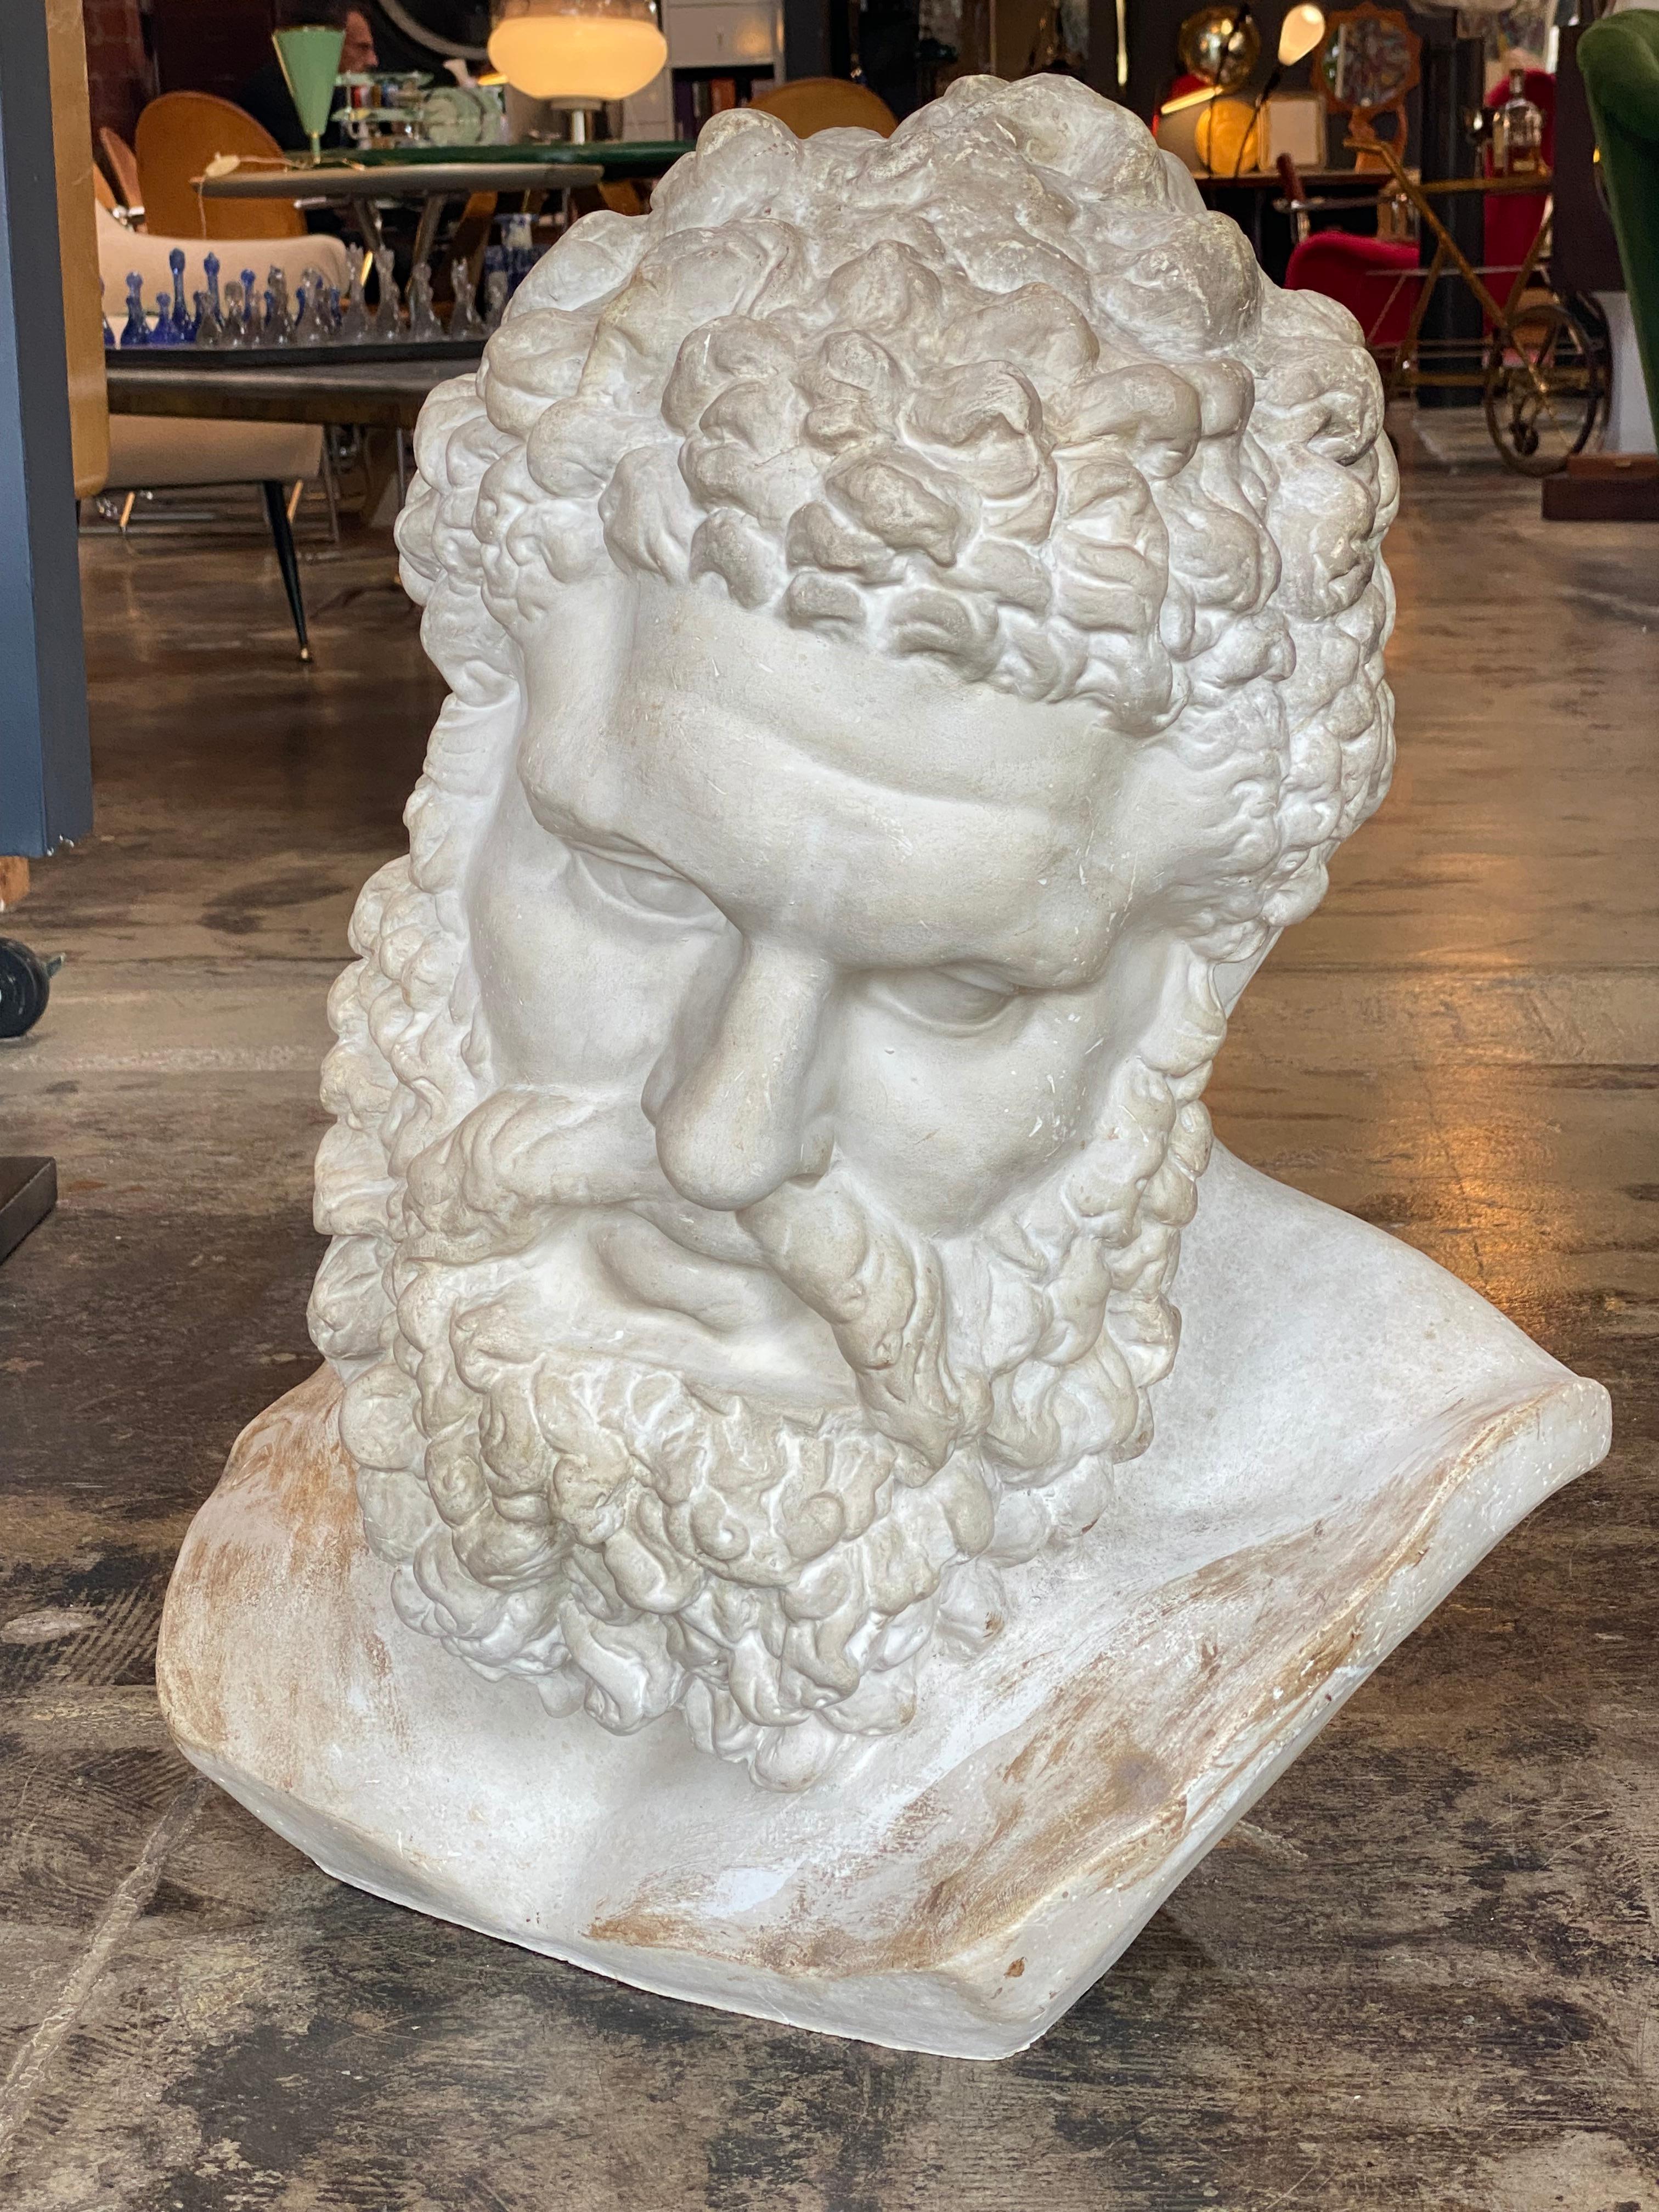 Handmade Ercole Farnese's sculpture made in plaster.
The Farnese Hercules is an ancient statue of Hercules, probably an enlarged copy made in the early third century AD and signed by Glykon, who is otherwise unknown; the name is Greek but he may